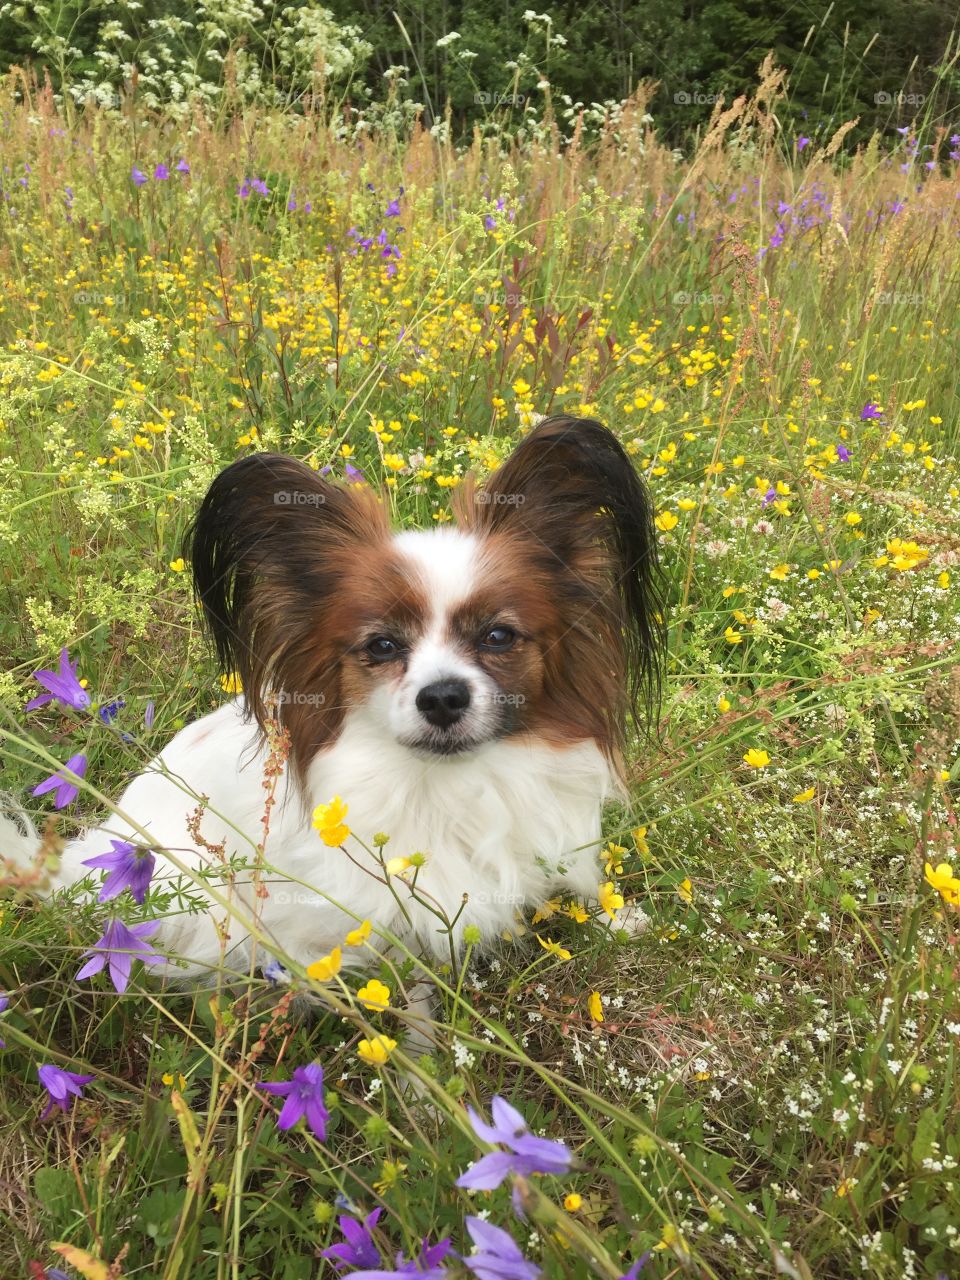 Lisa the papillon in the flower field